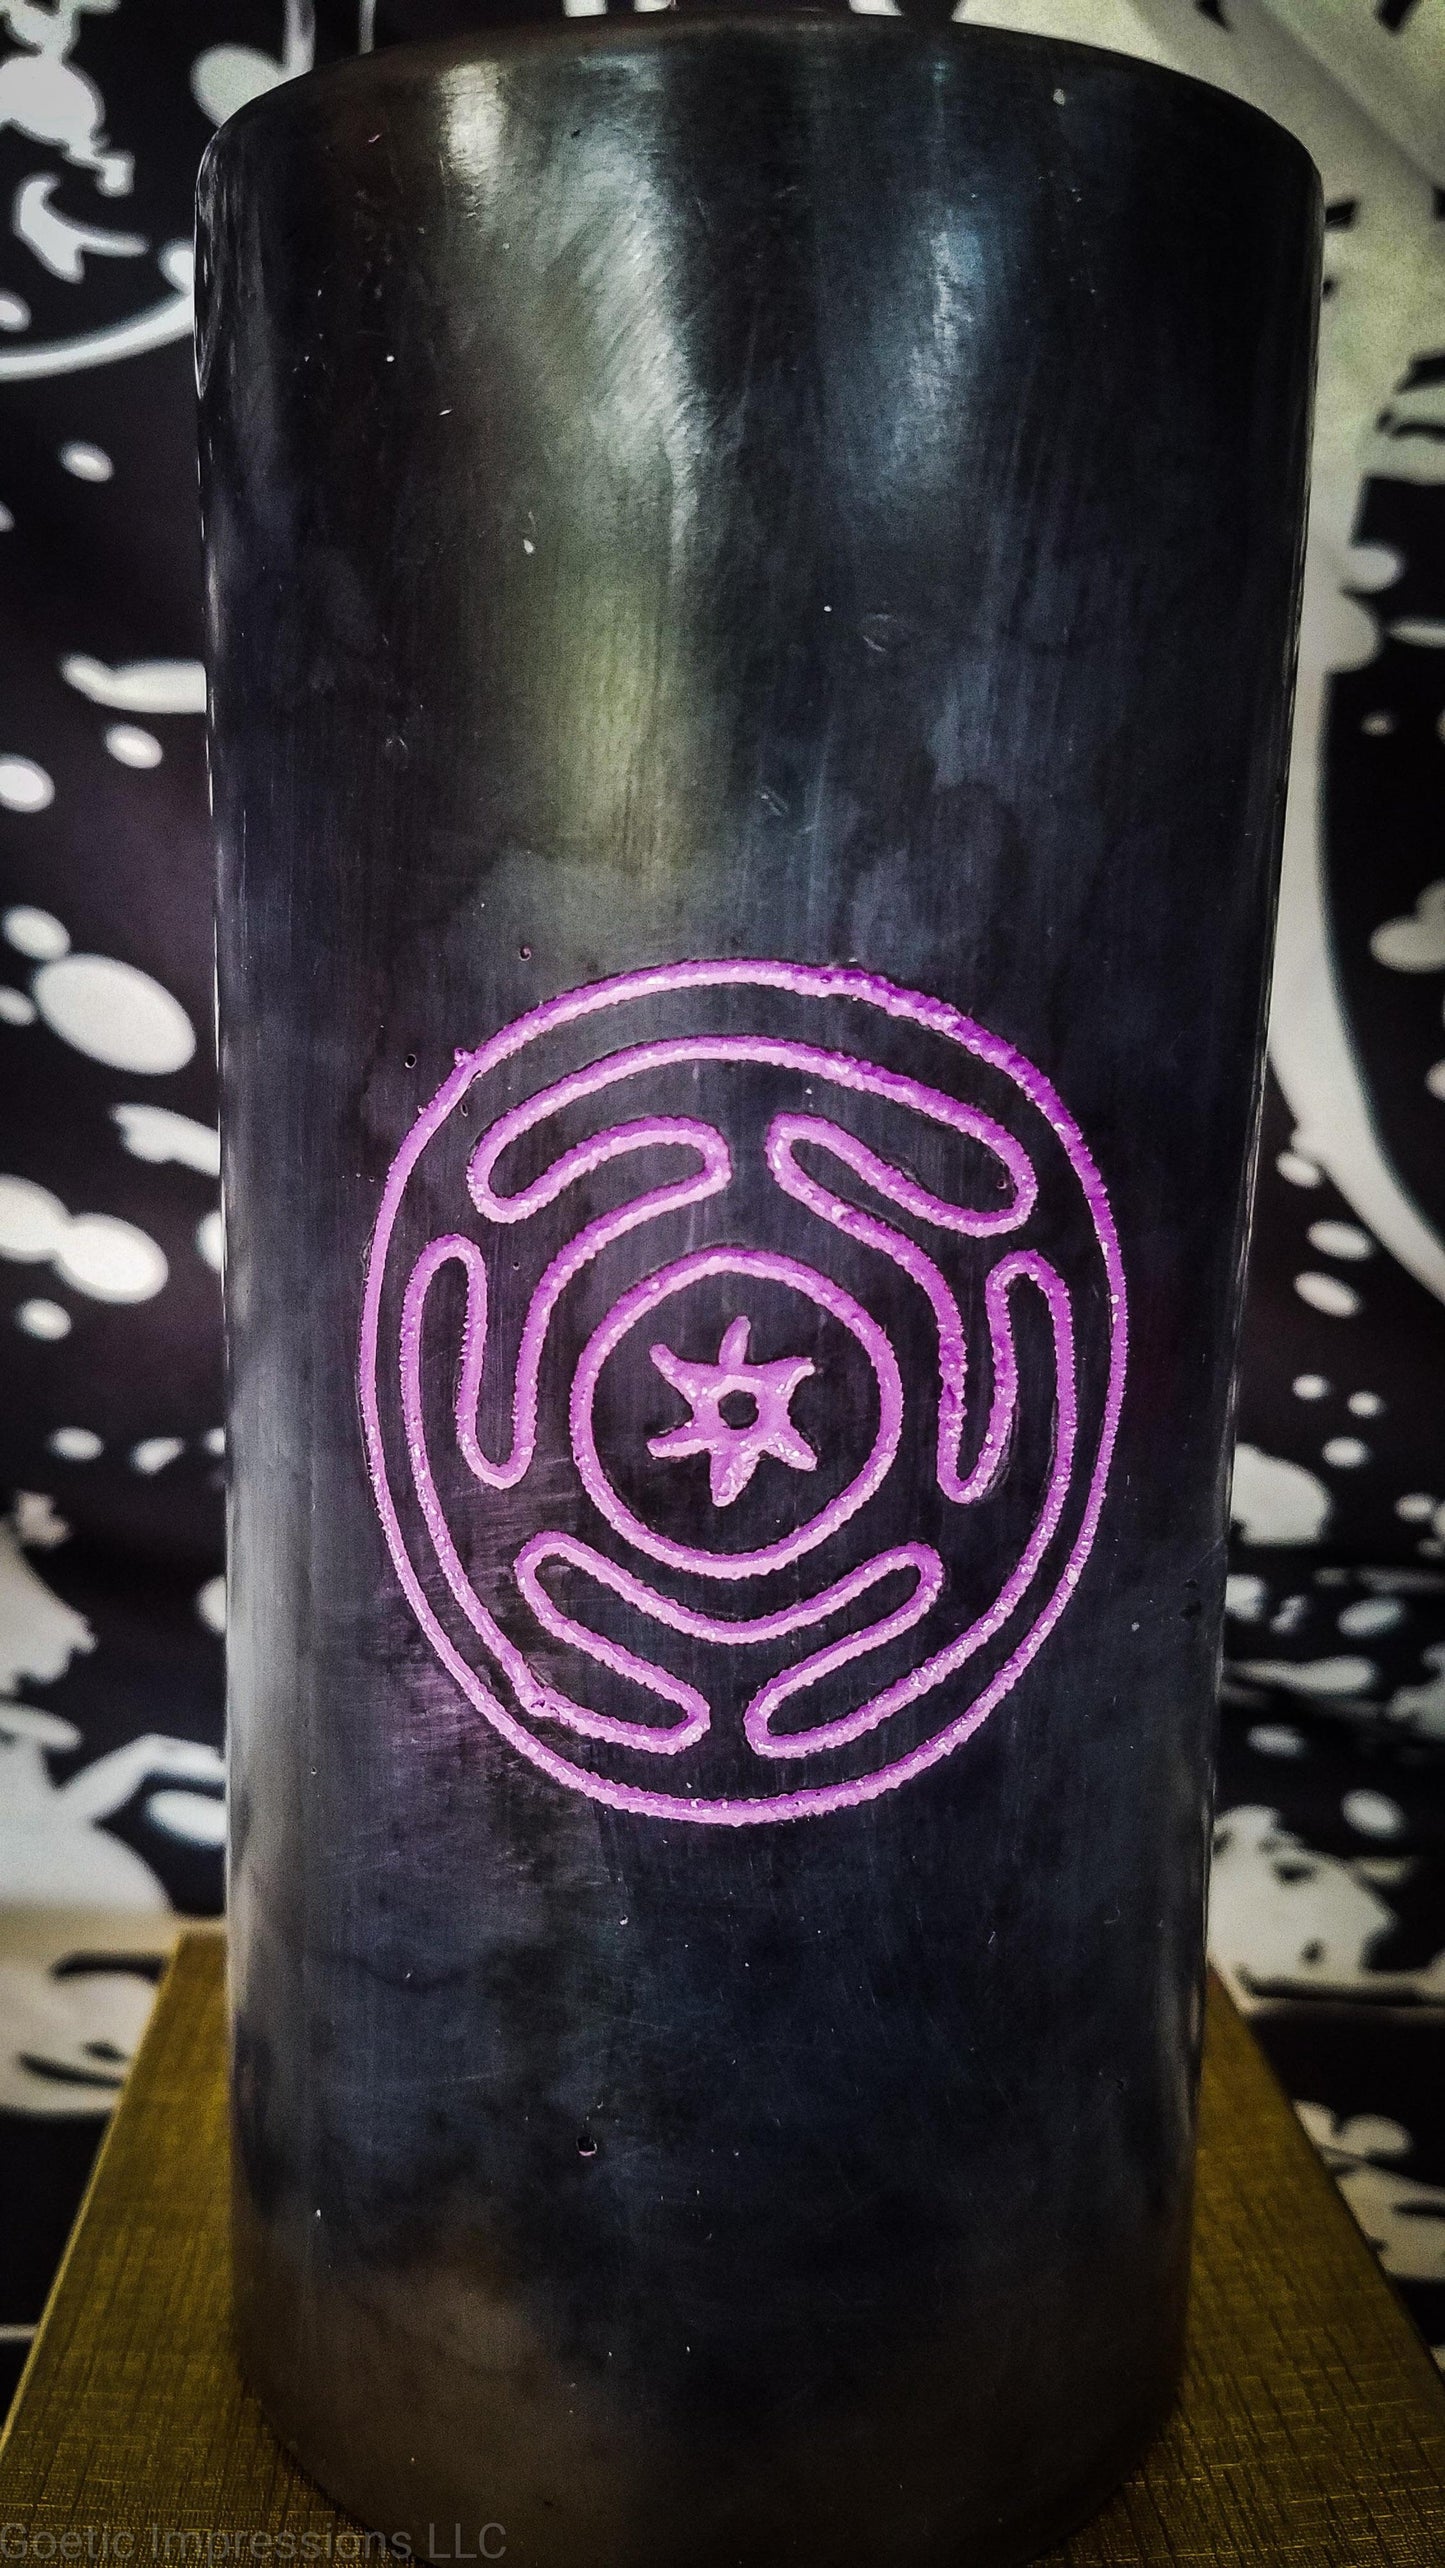 Purple Hekate sigil engraved in a black candle